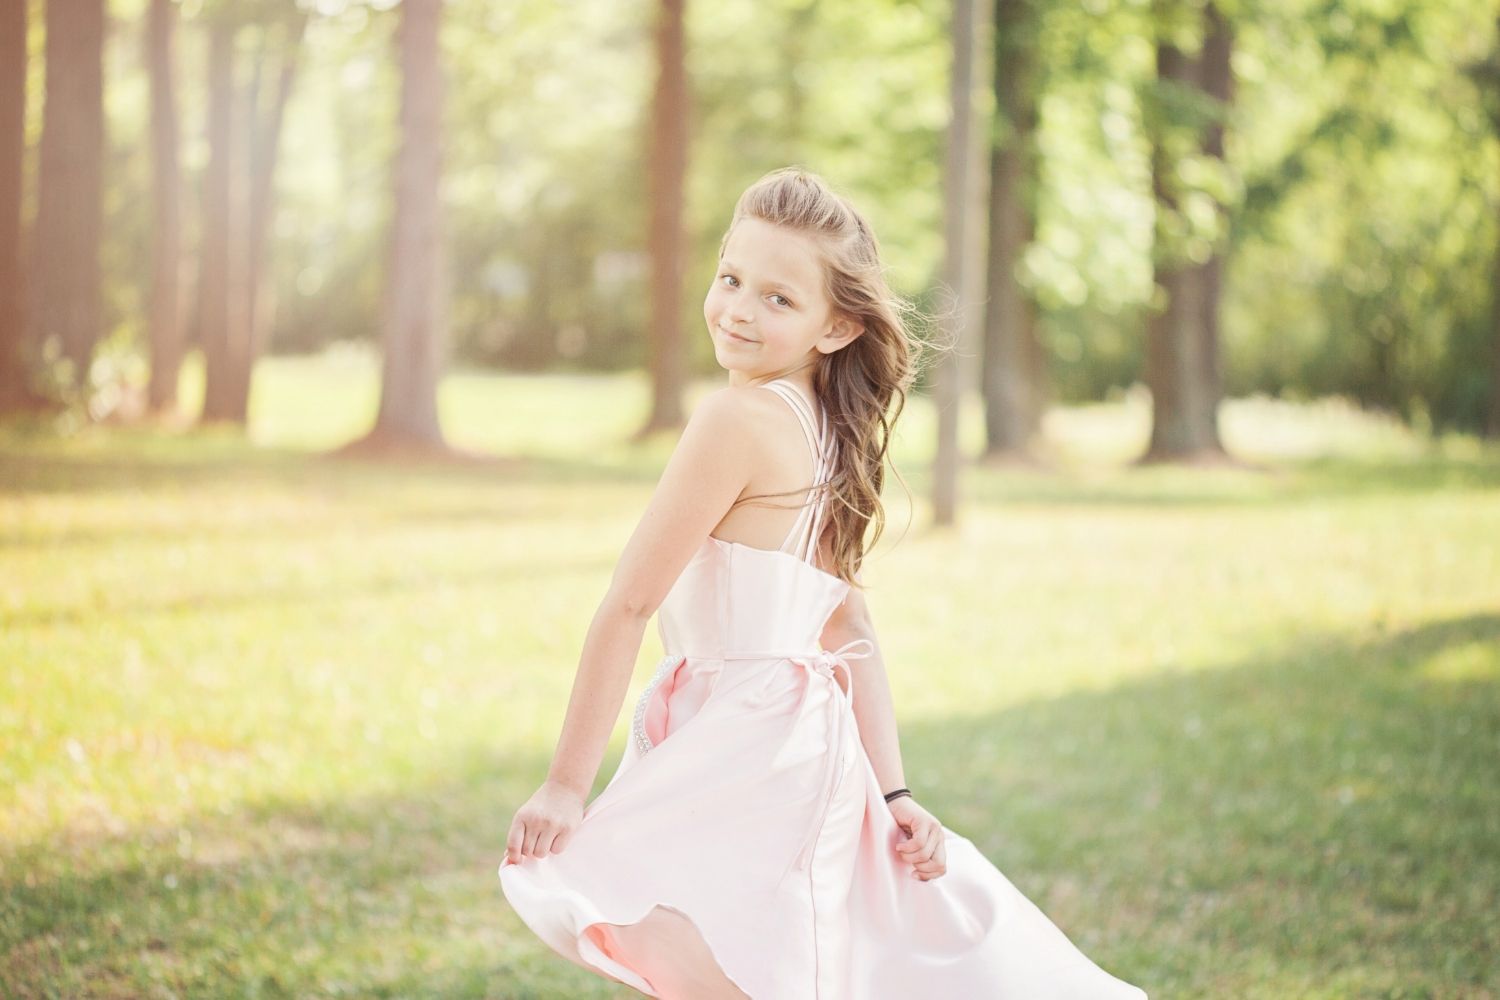 Natchitoches La Photographer Wendy Robinette explains why Tween Portrait Sessions are important for a child's self confidence.